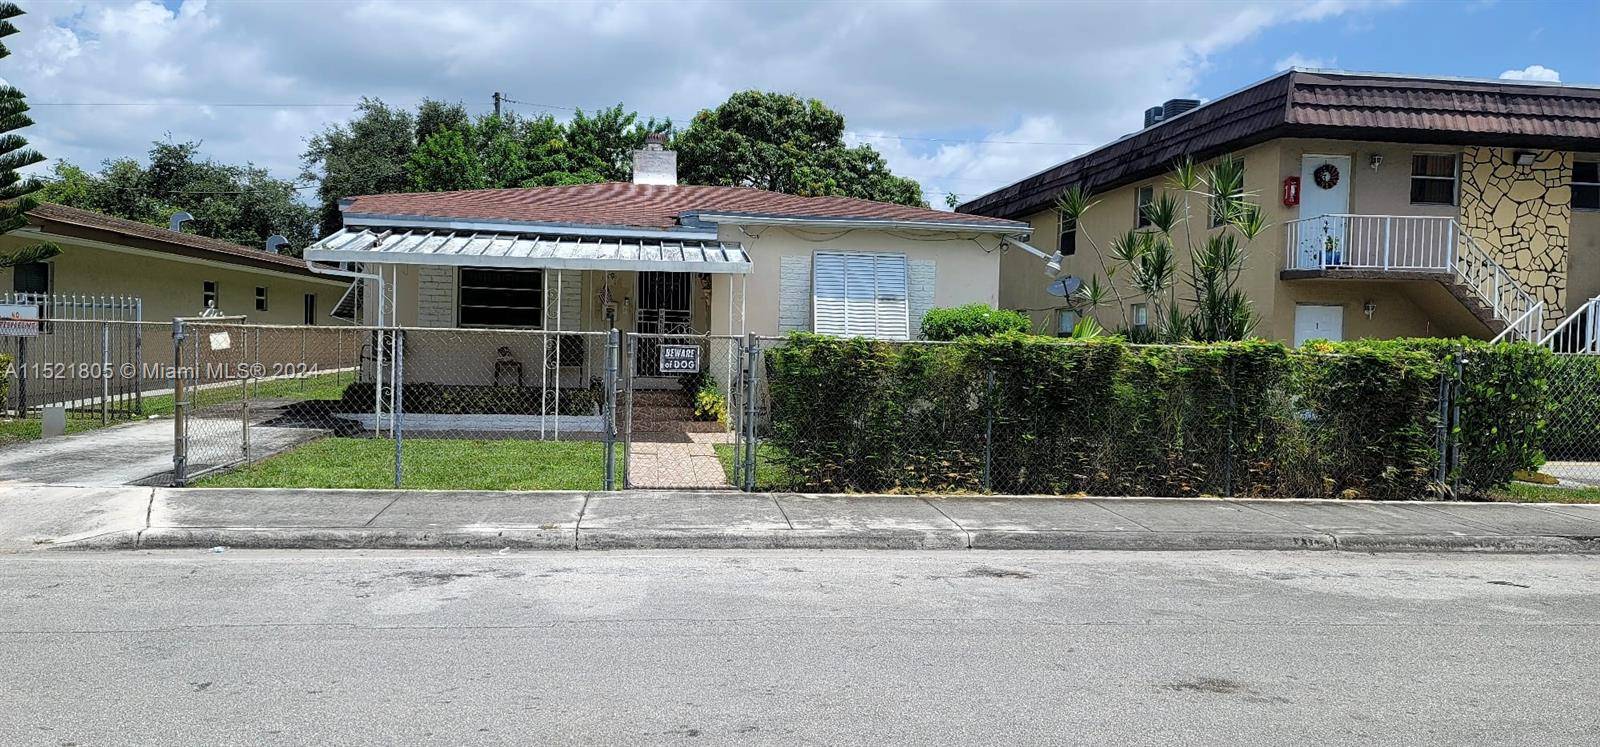 THIS IS A PROPERTY THAT IS IN A GREAT AREA IN HIALEAH.